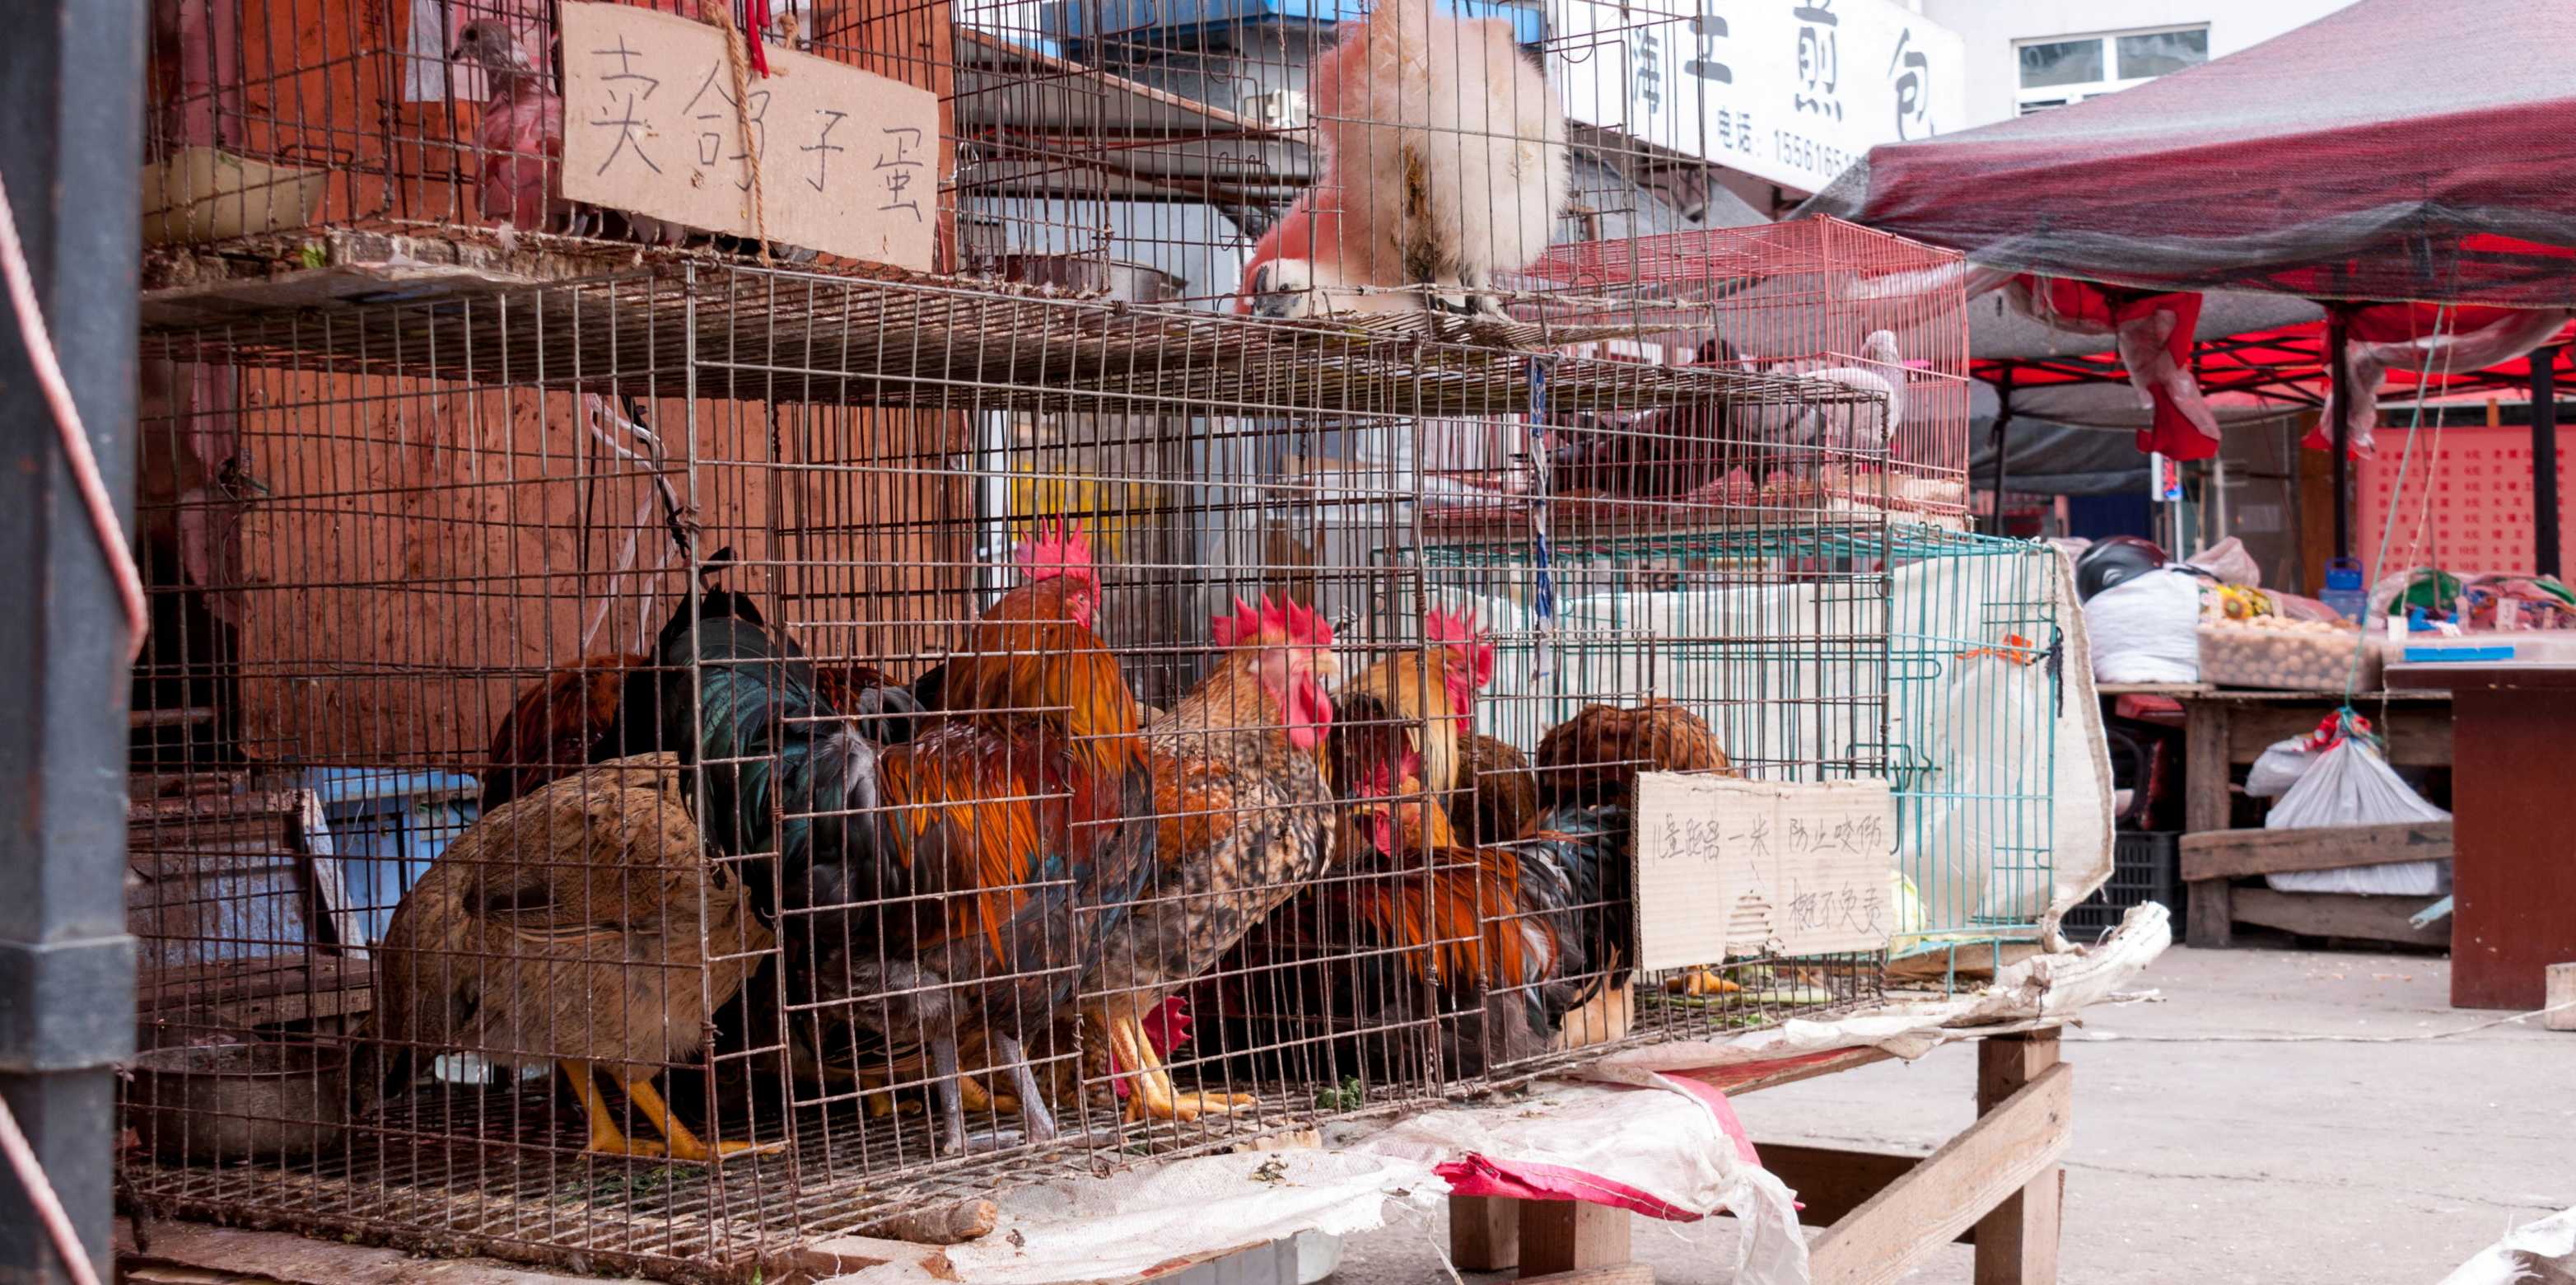 Picture from a market in China where chickens sit tightly crammed in a cage.